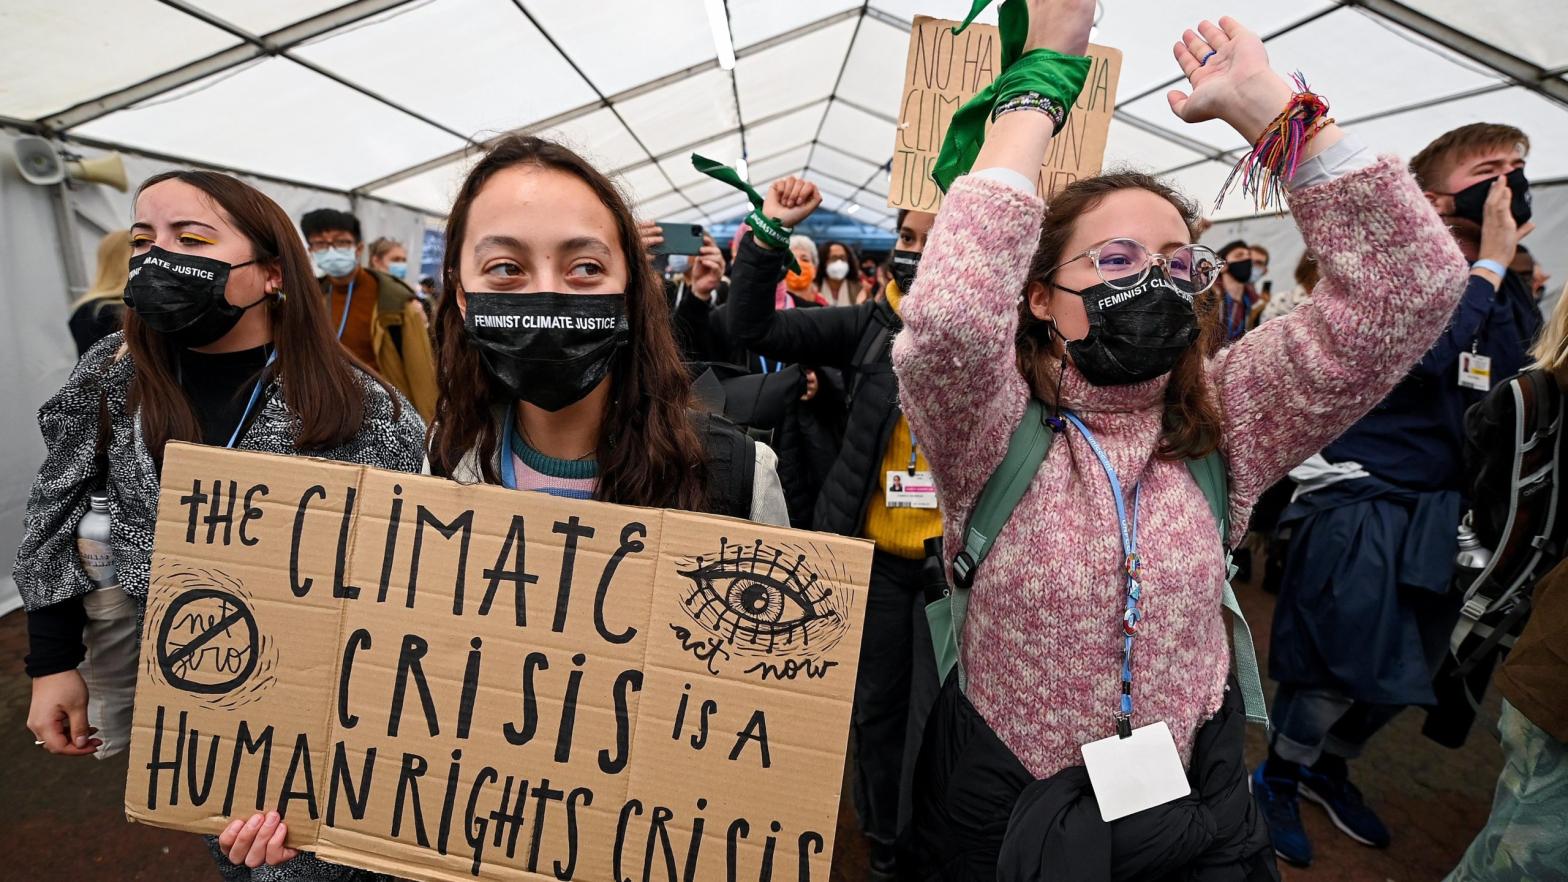 Protesters move through restricted Blue Zone area of COP26 climate summit. (Photo: Jeff J. Mitchell, Getty Images)